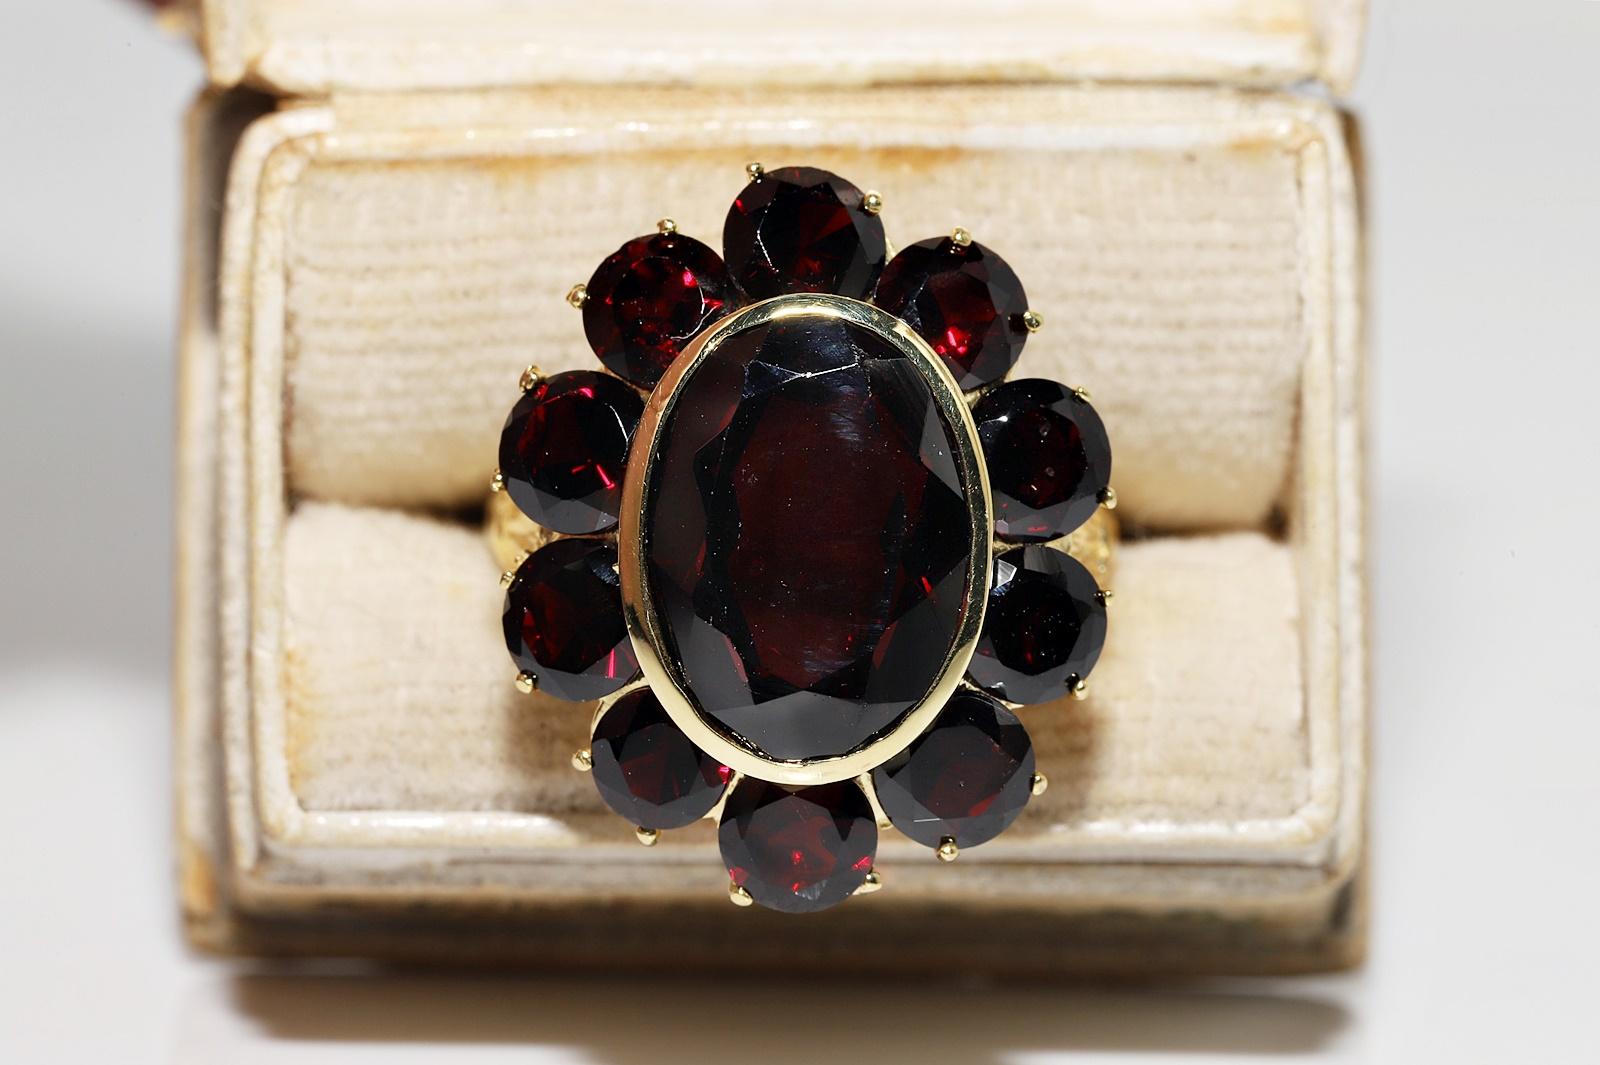 In very good condition.
Total weight is 6.4 grams.
Totally is garnet about 6 ct.
Ring size is US 8.5 
We can make any size.
Box is not included.
Please contact for any questions.